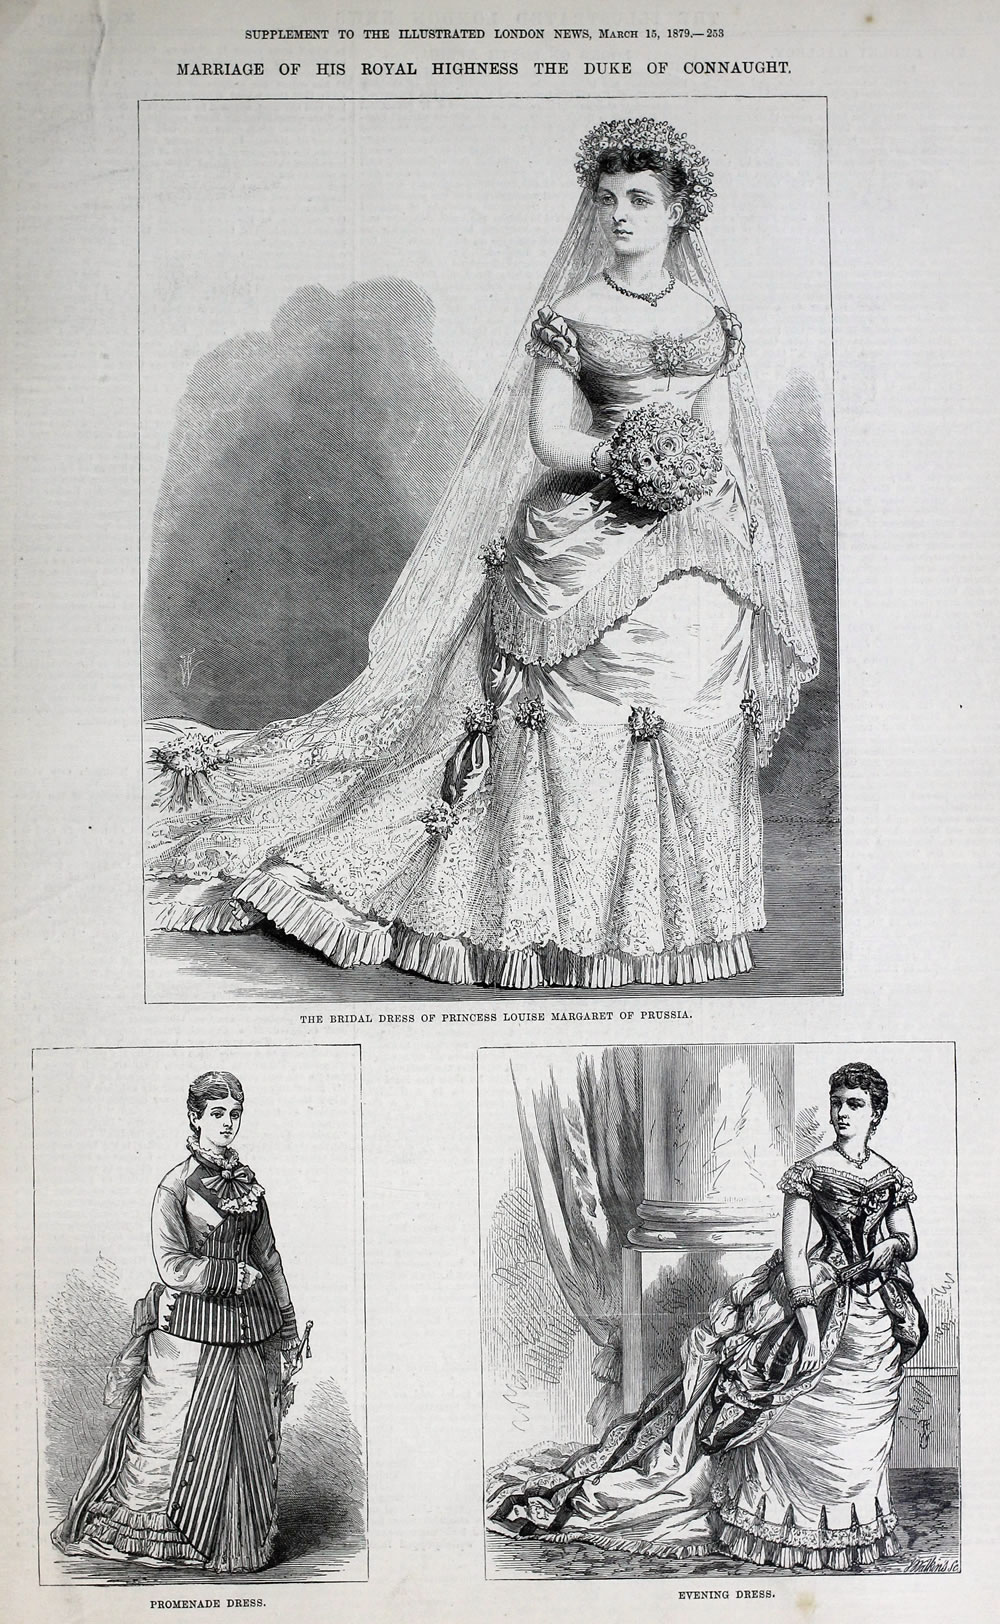 The Illustrated London News 15th March 1879 published images of the wedding dresses worn by the royal bride